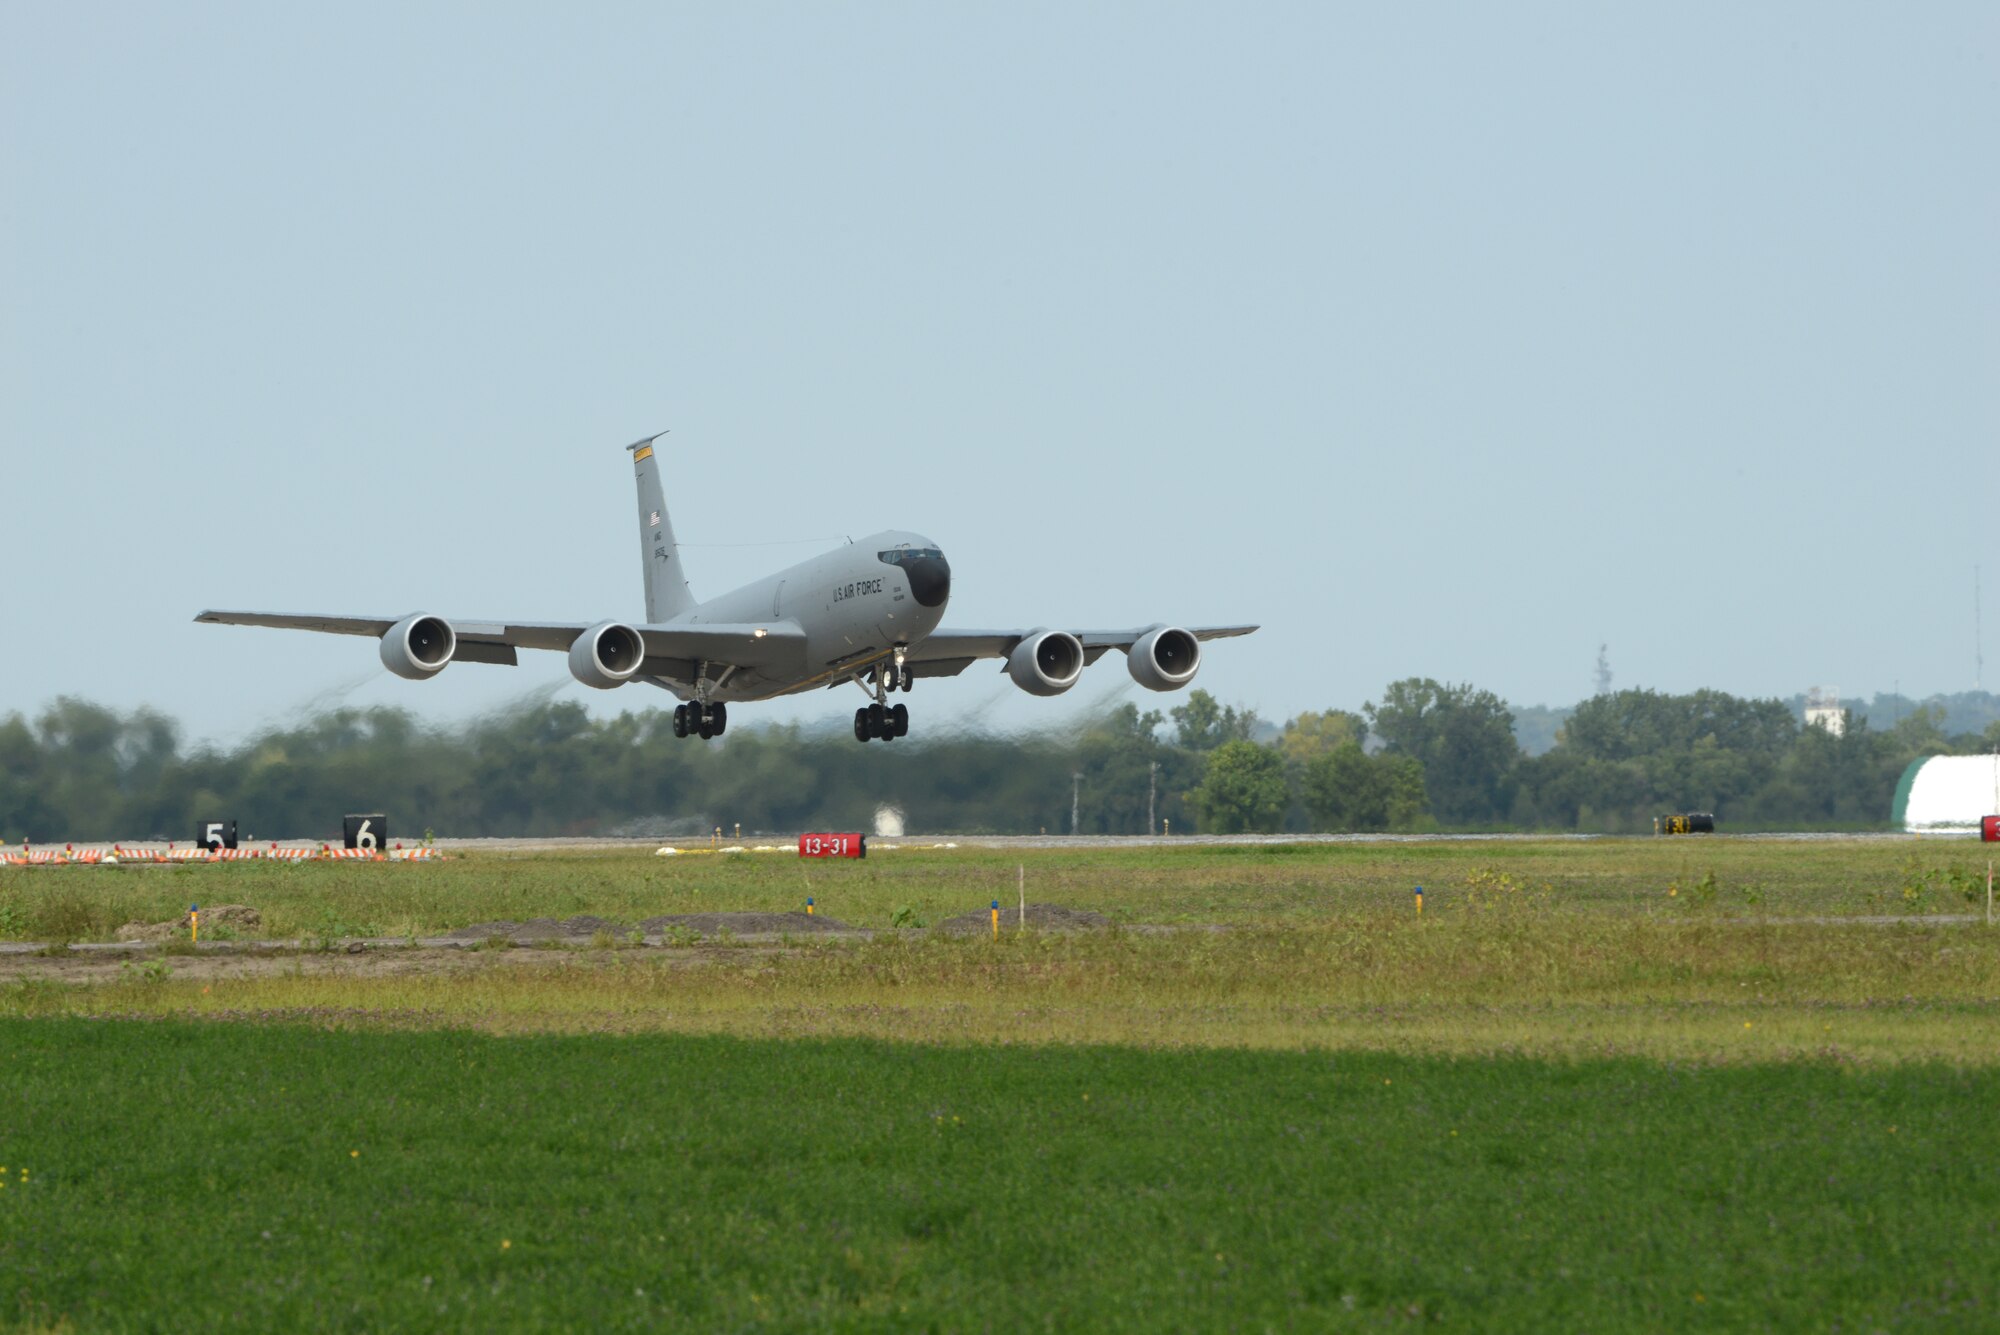 A U.S. Air Force KC-135 Stratotanker assigned to the Iowa Air National Guard’s 185th Air Refueling Wing leaves a trail of jet wash as it takes off from the Sioux City, Iowa, based Air Guard unit on Sept. 17, 2020.